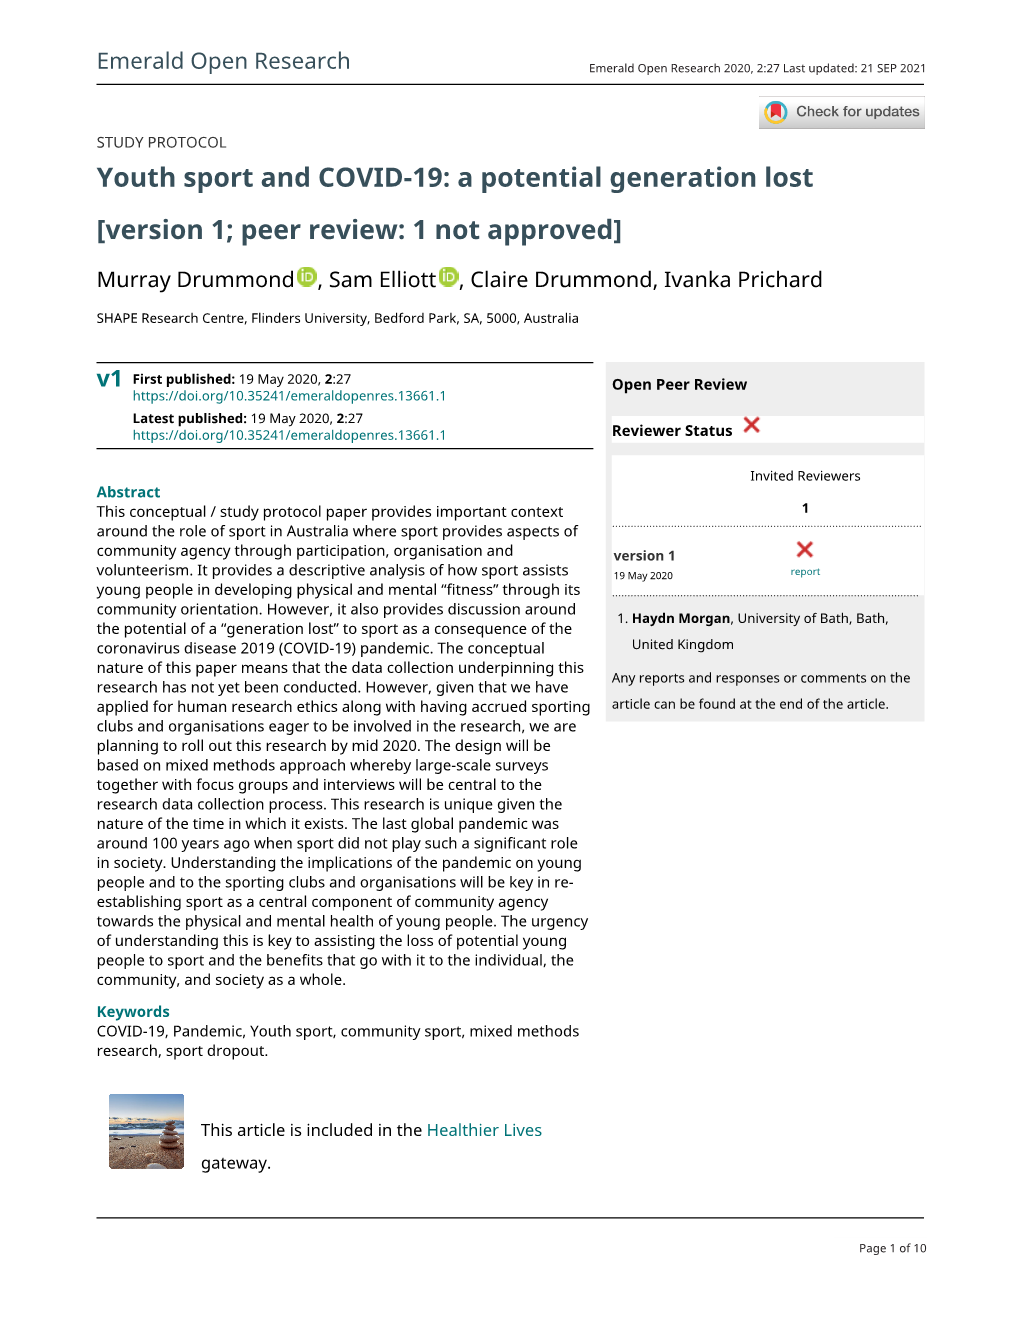 Youth Sport and COVID-19: a Potential Generation Lost [Version 1; Peer Review: 1 Not Approved]